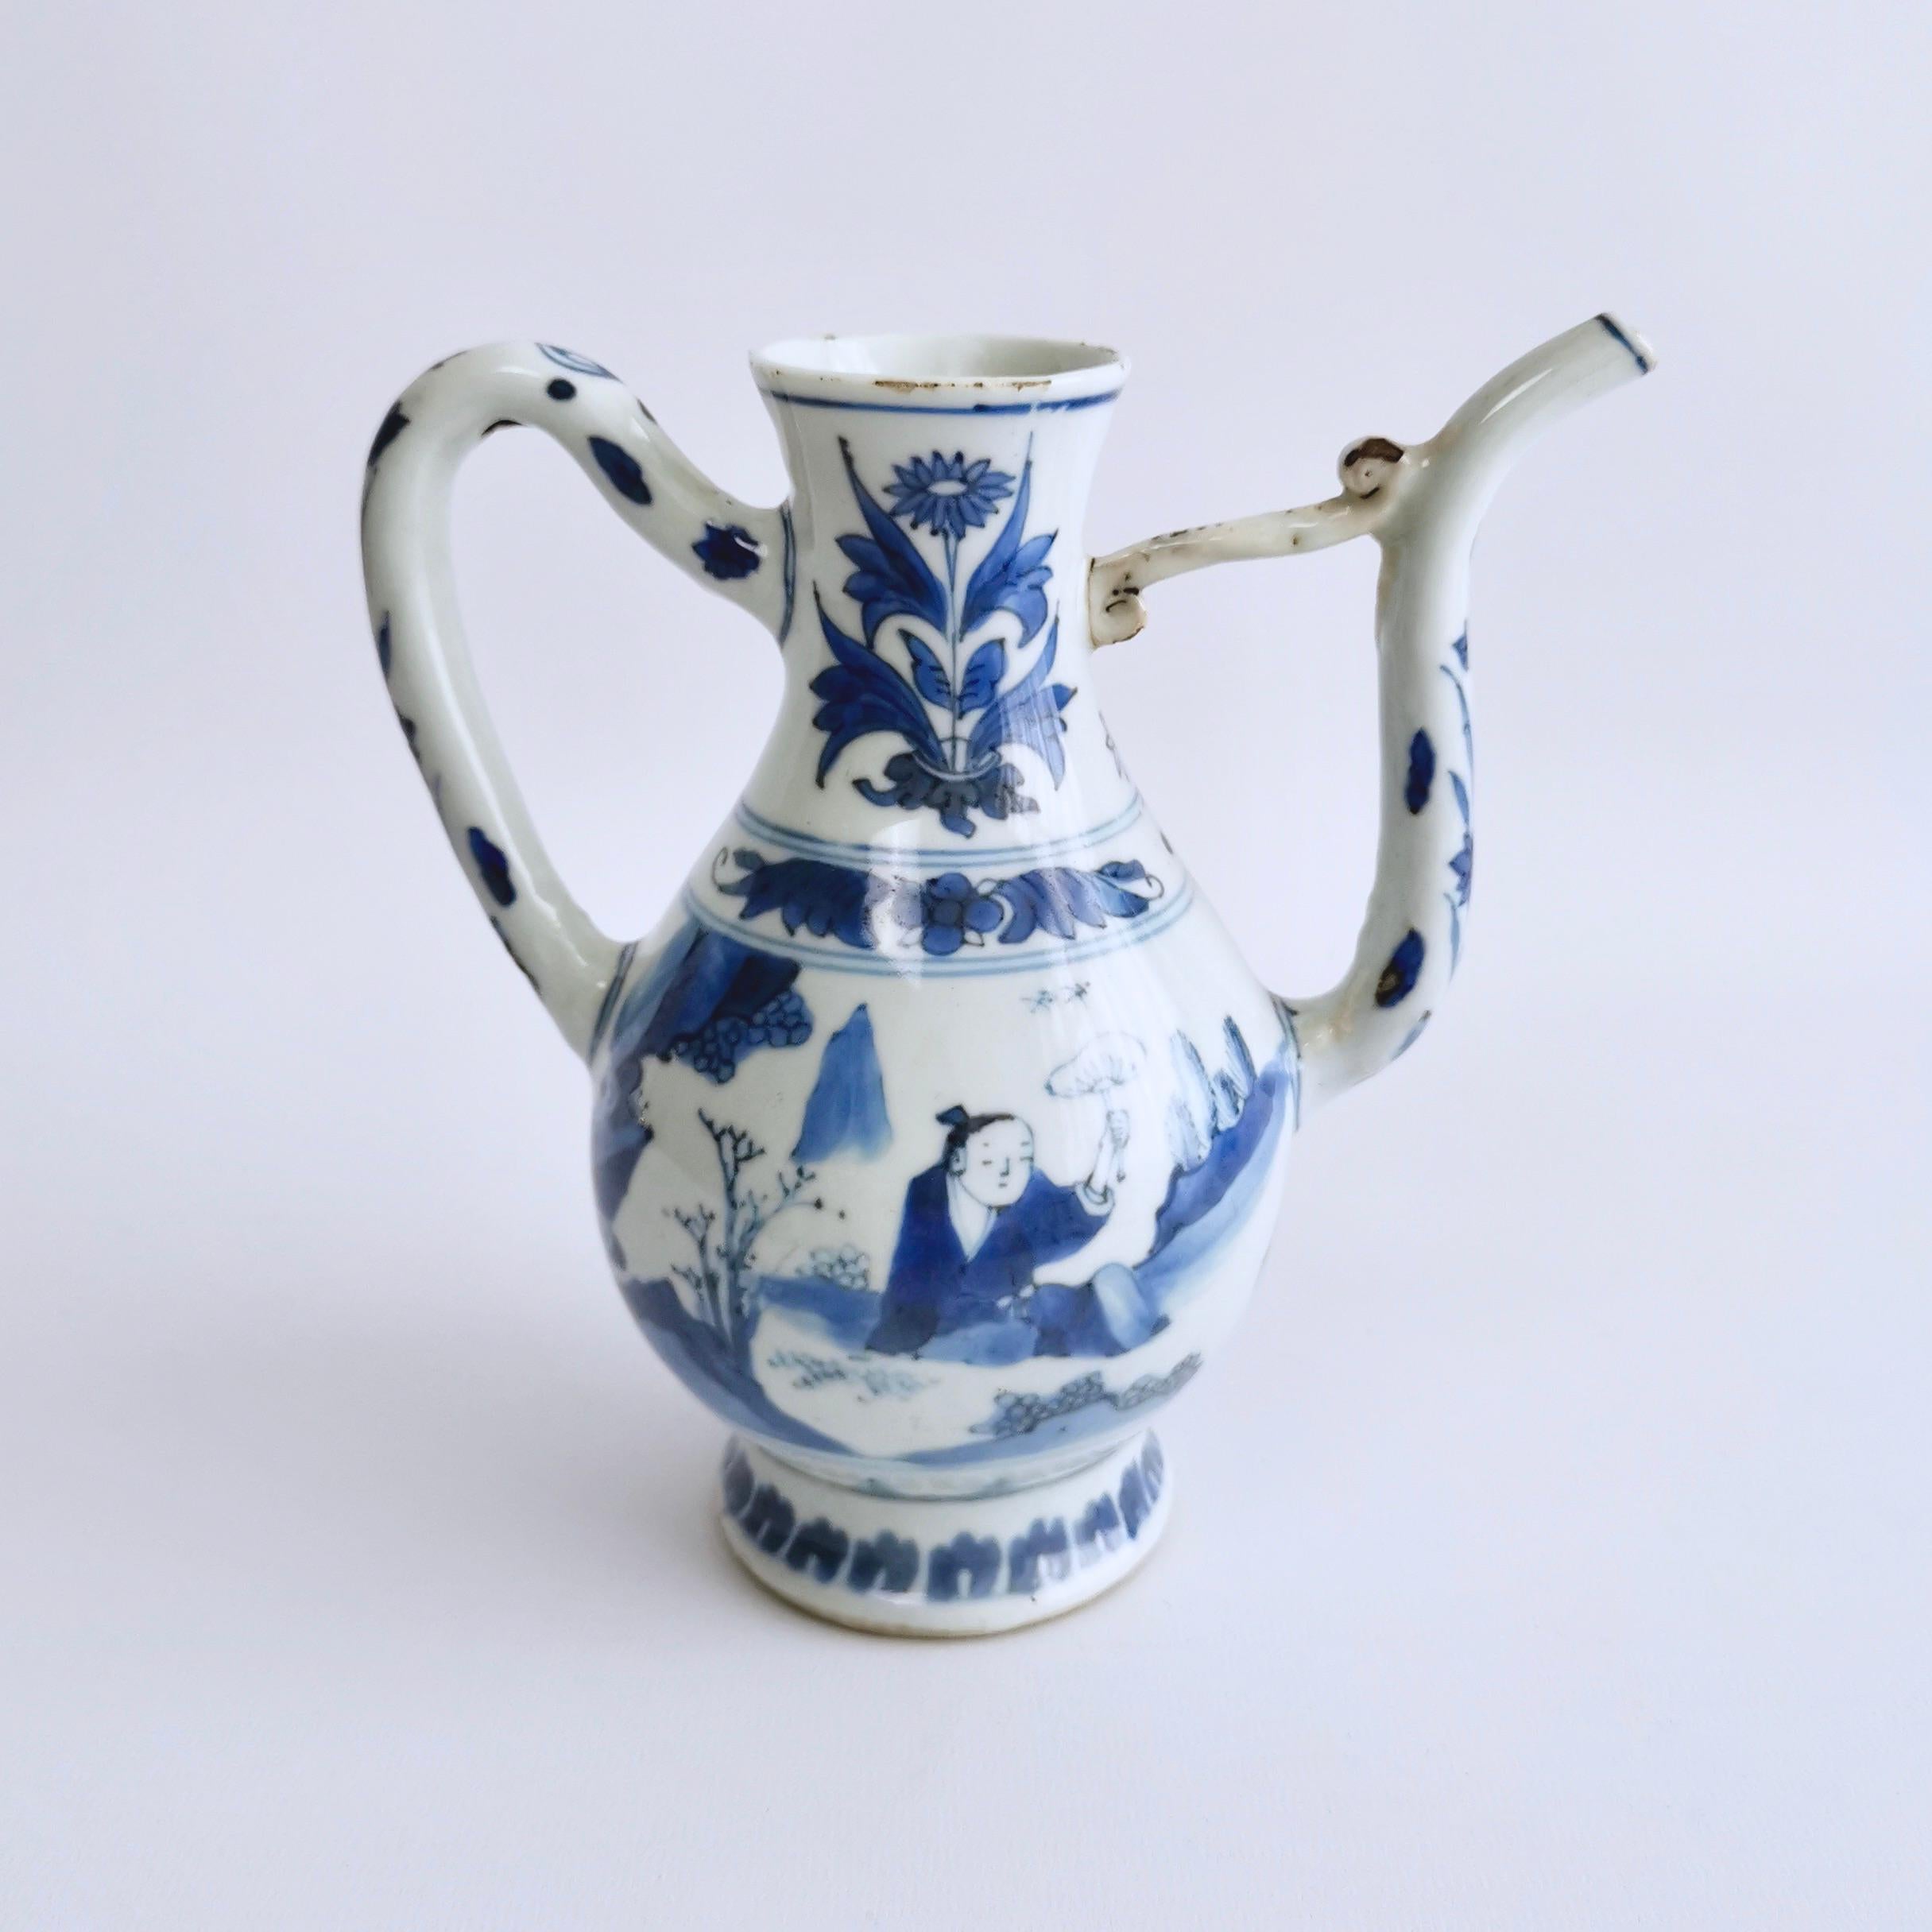 On offer is a beautiful ewer from the Chongzhen Transitional era, roughly between 1628 and 1644. The ewer has a beautiful underglaze blue painting of reclining figures fanning themselves.

The Chongzhen Emperor was the 17th and last Emperor of the